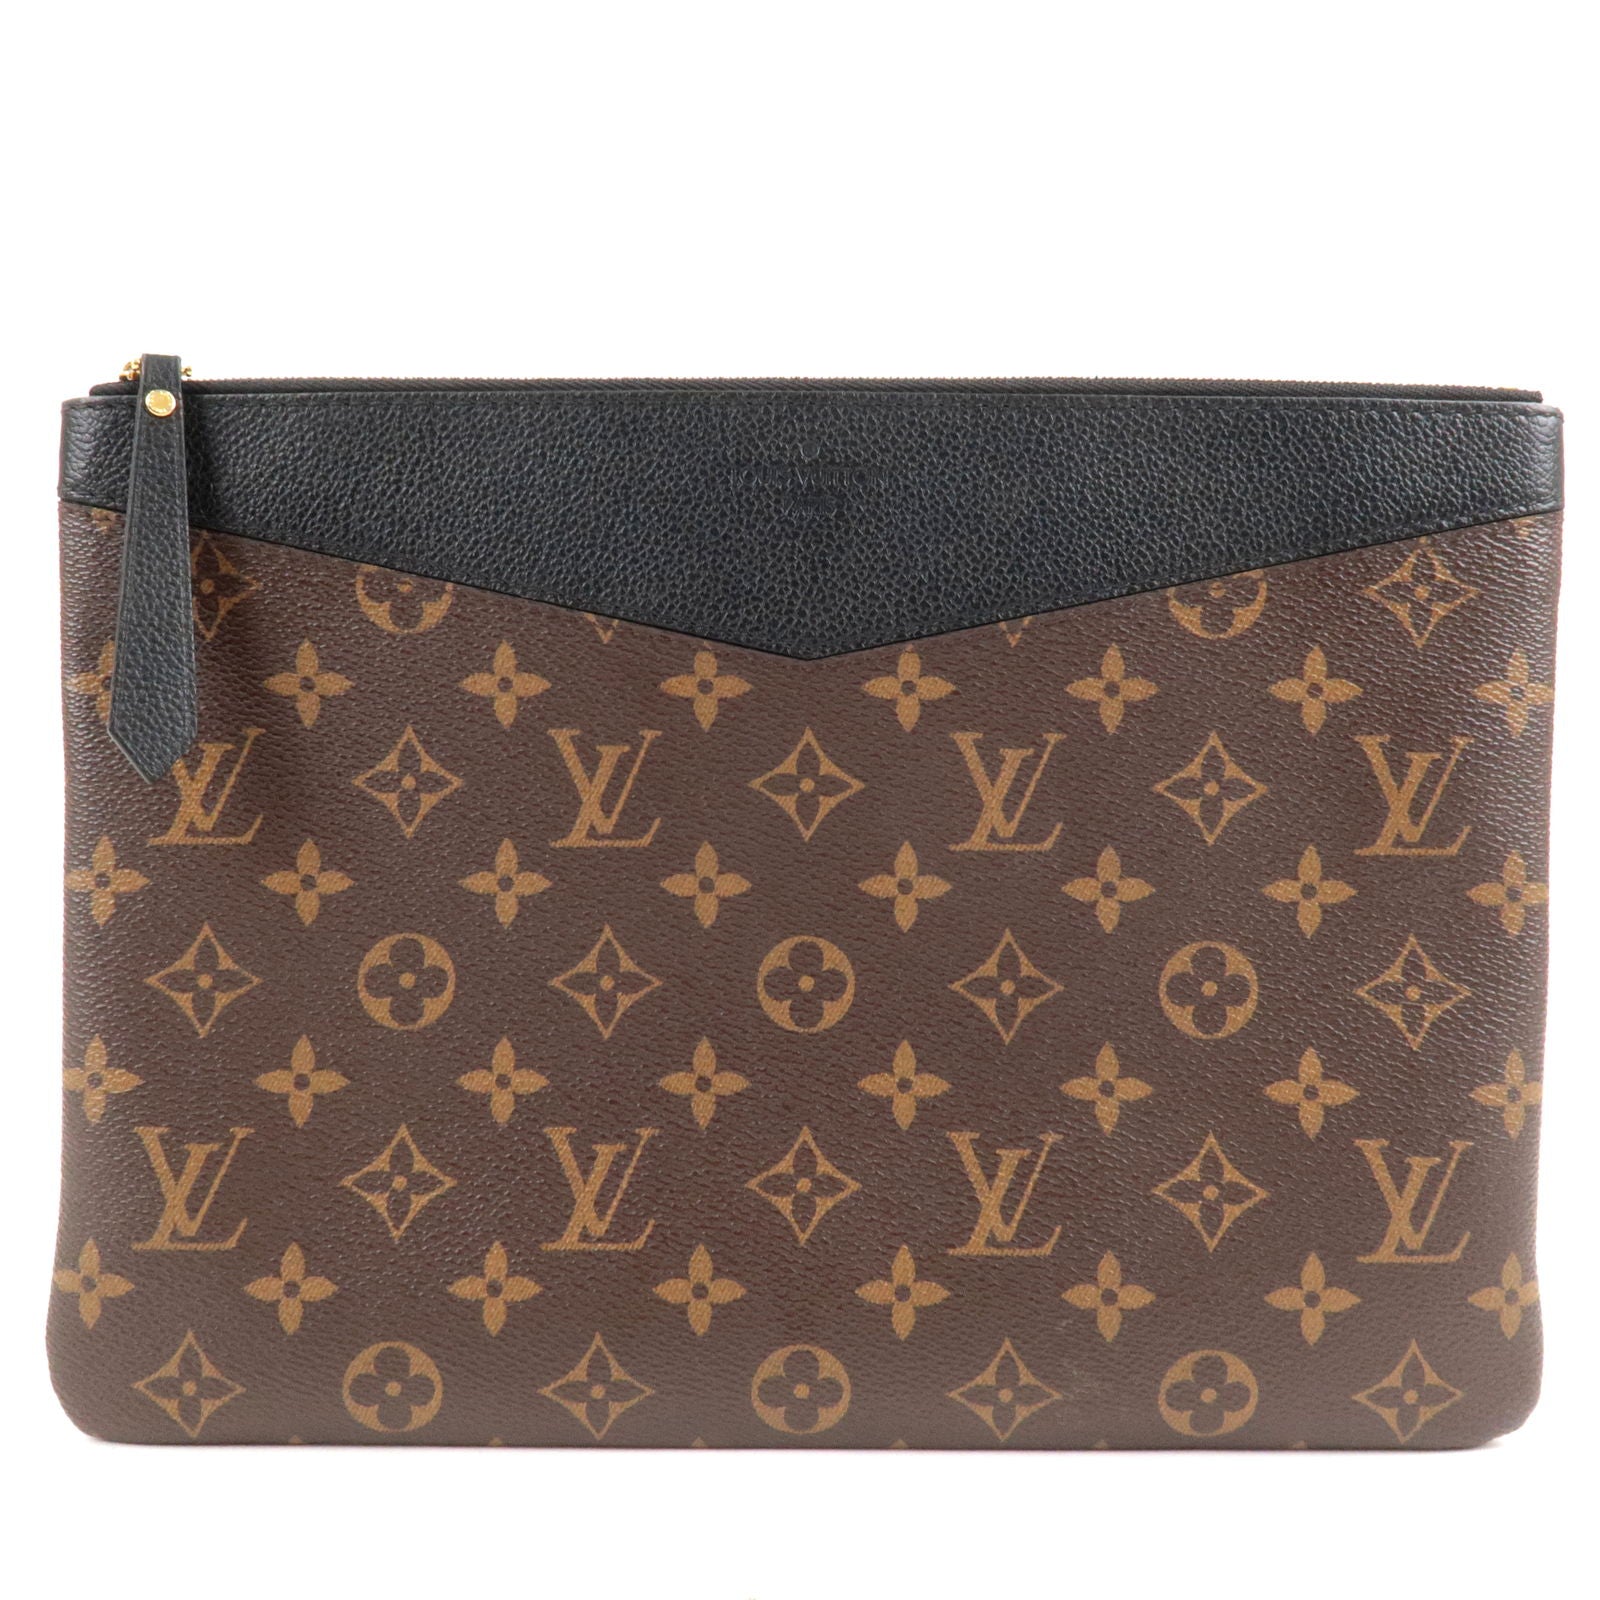 daily pouch lv